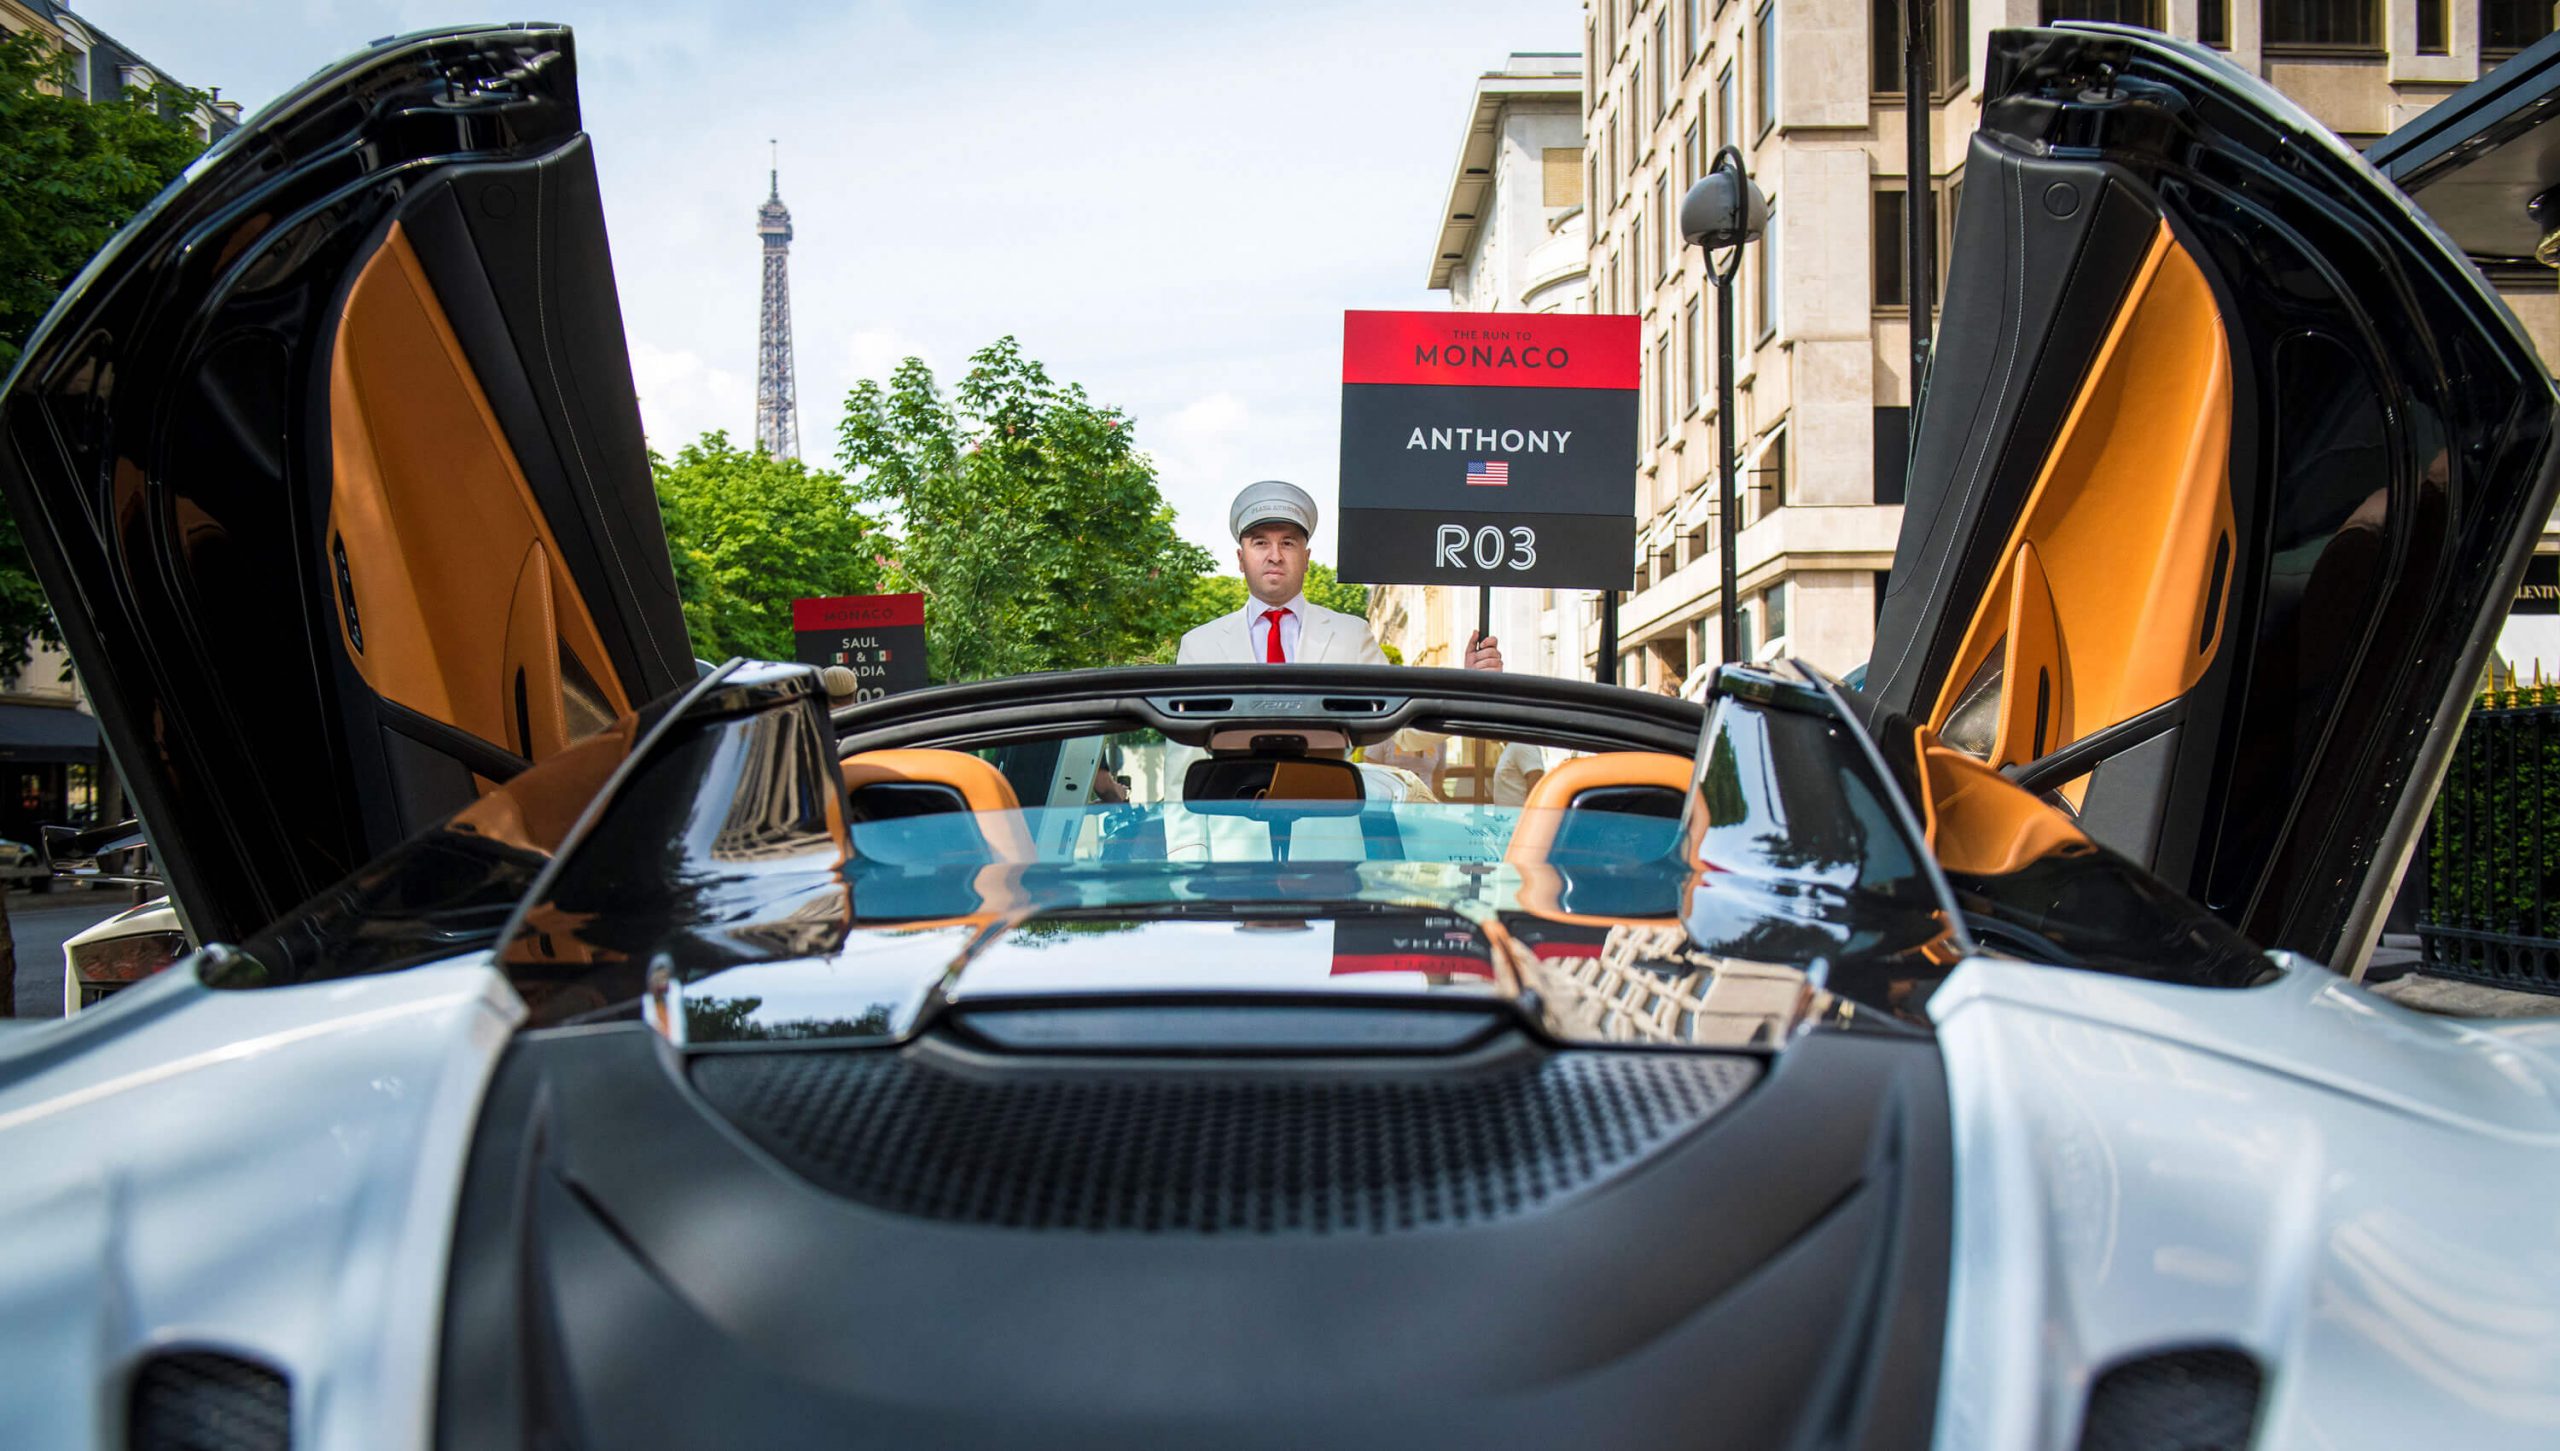 White Mclaren supercar with doors open in front of man holding sign and with Eiffel Tower in the background